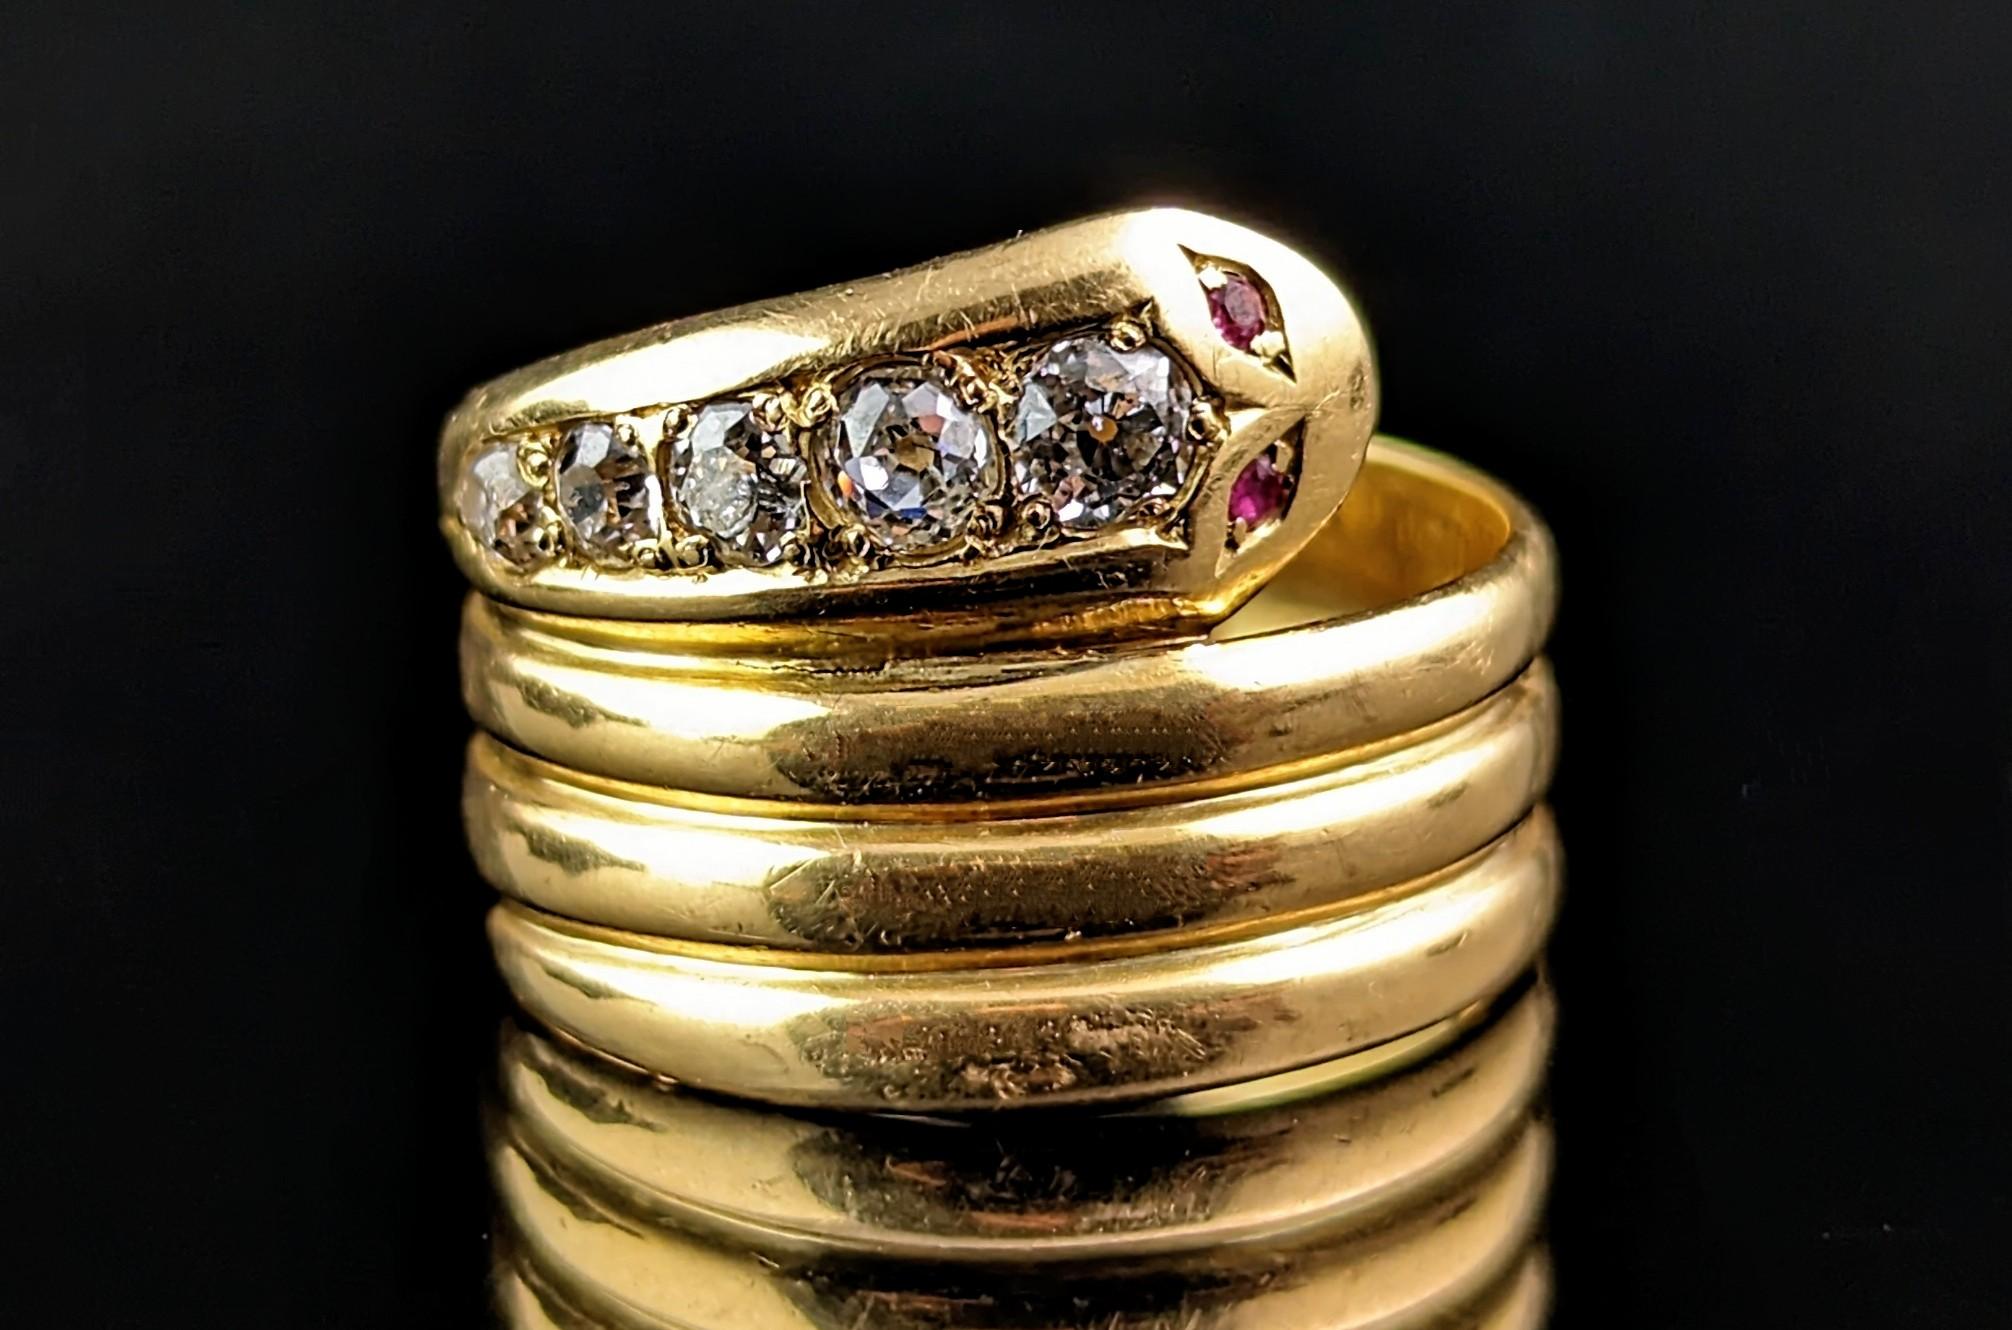 You can't help but be charmed by this impeccable antique, Art Deco diamond and Ruby snake ring.

Coils of rich, buttery yellow gold form the body of this fine fellow which curves around the finger effortlessly, the head resting at the top and loaded